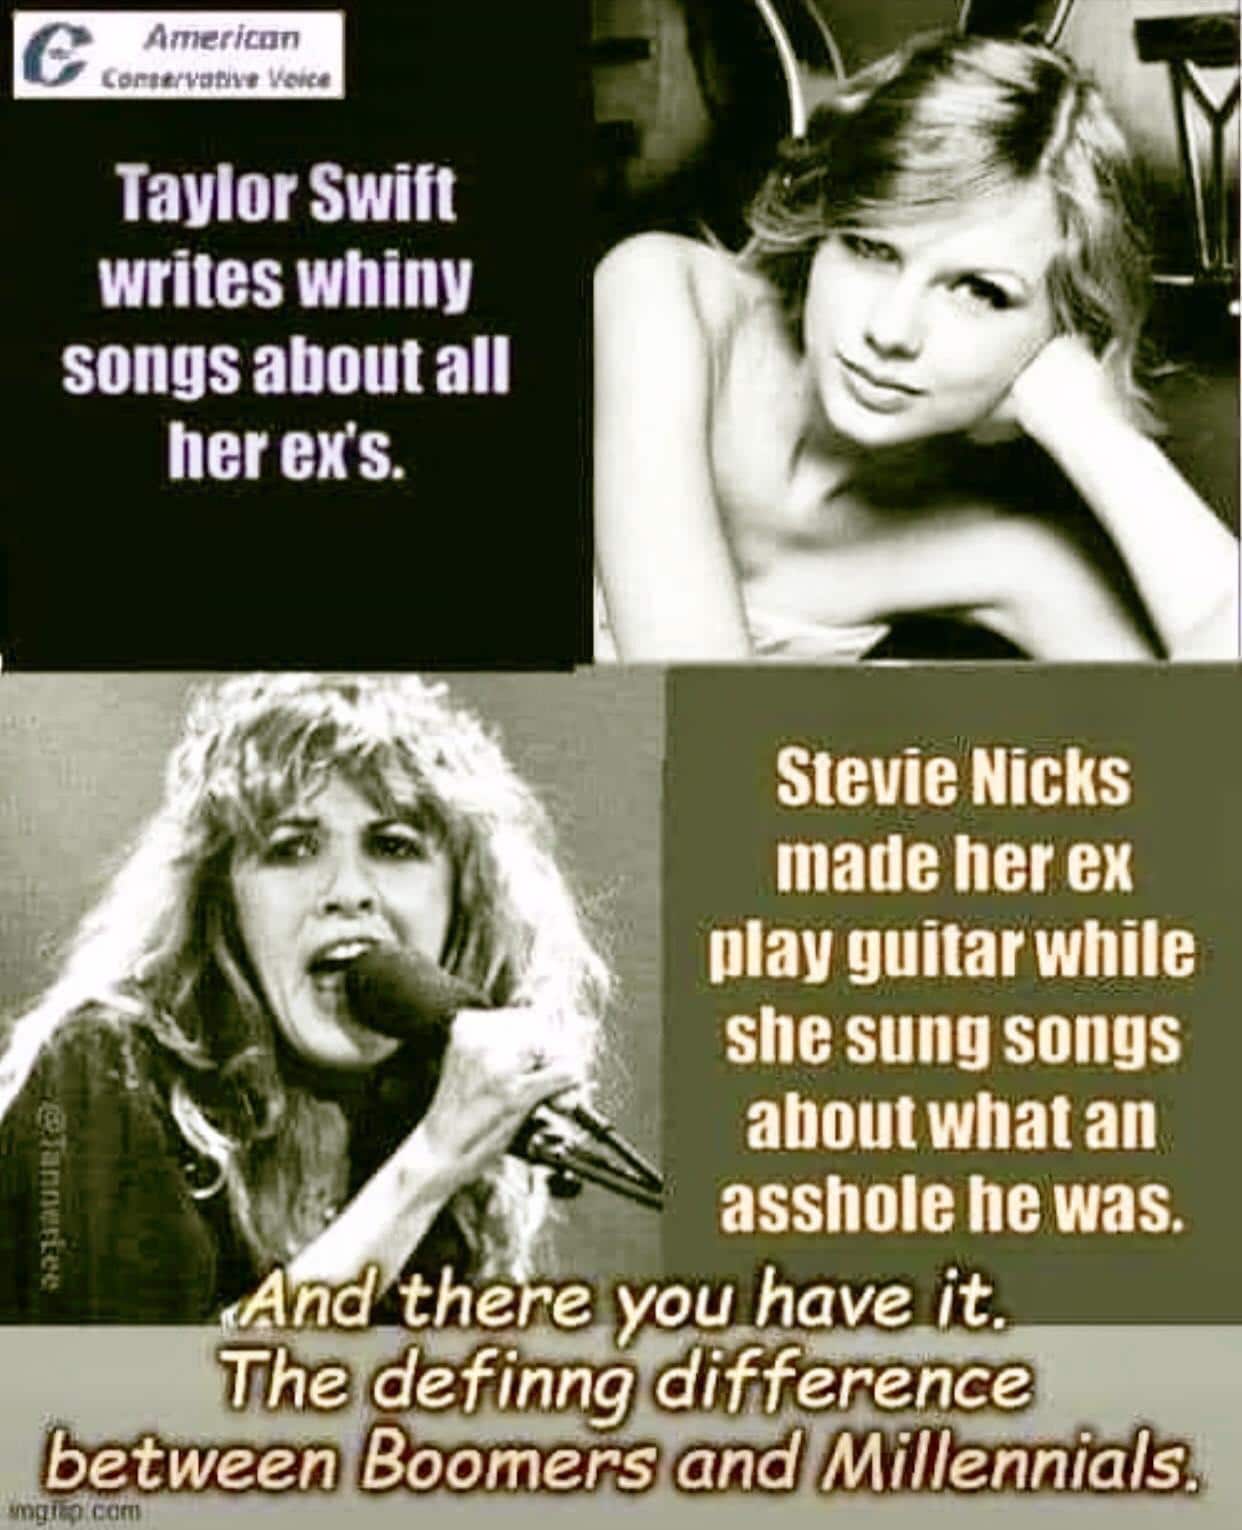 Cringe, Taylor, Stevie, Fleetwood Mac cringe memes Cringe, Taylor, Stevie, Fleetwood Mac text: American Taylor Swift writes whiny songs about all her ers. Stevie Nicks made her ex play guitar while she sung songs aboutwhatan asshole he was. And the e you have it. The definng difference between Boomers and Millennials:ti$ 